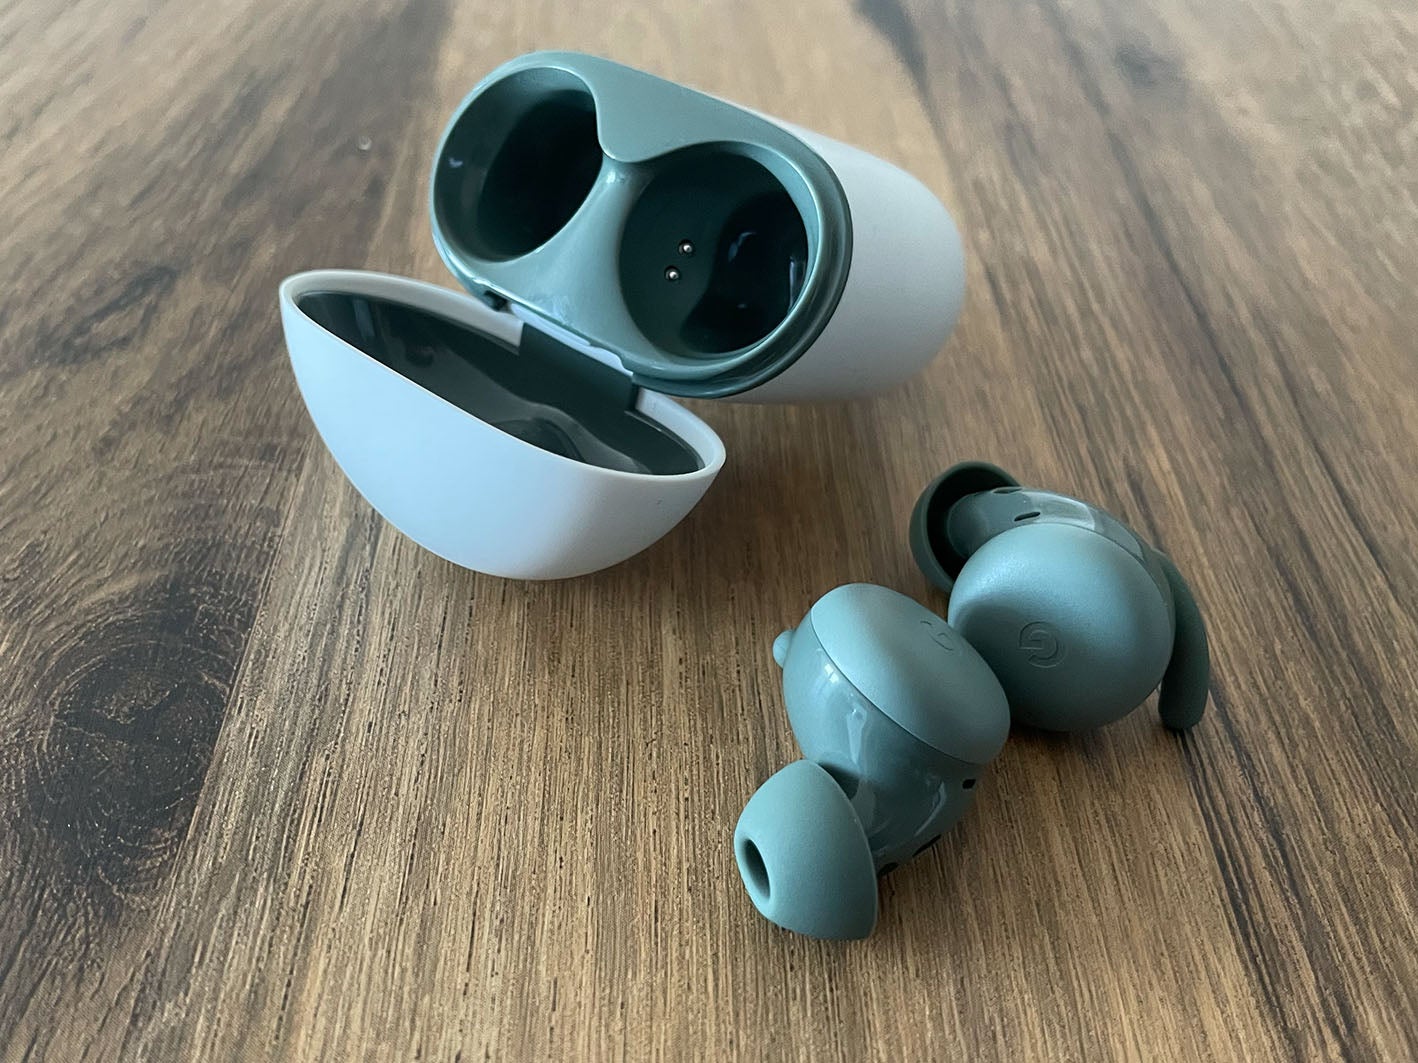 The new Pixel buds come in a variety of different colours, including this dark olive shade